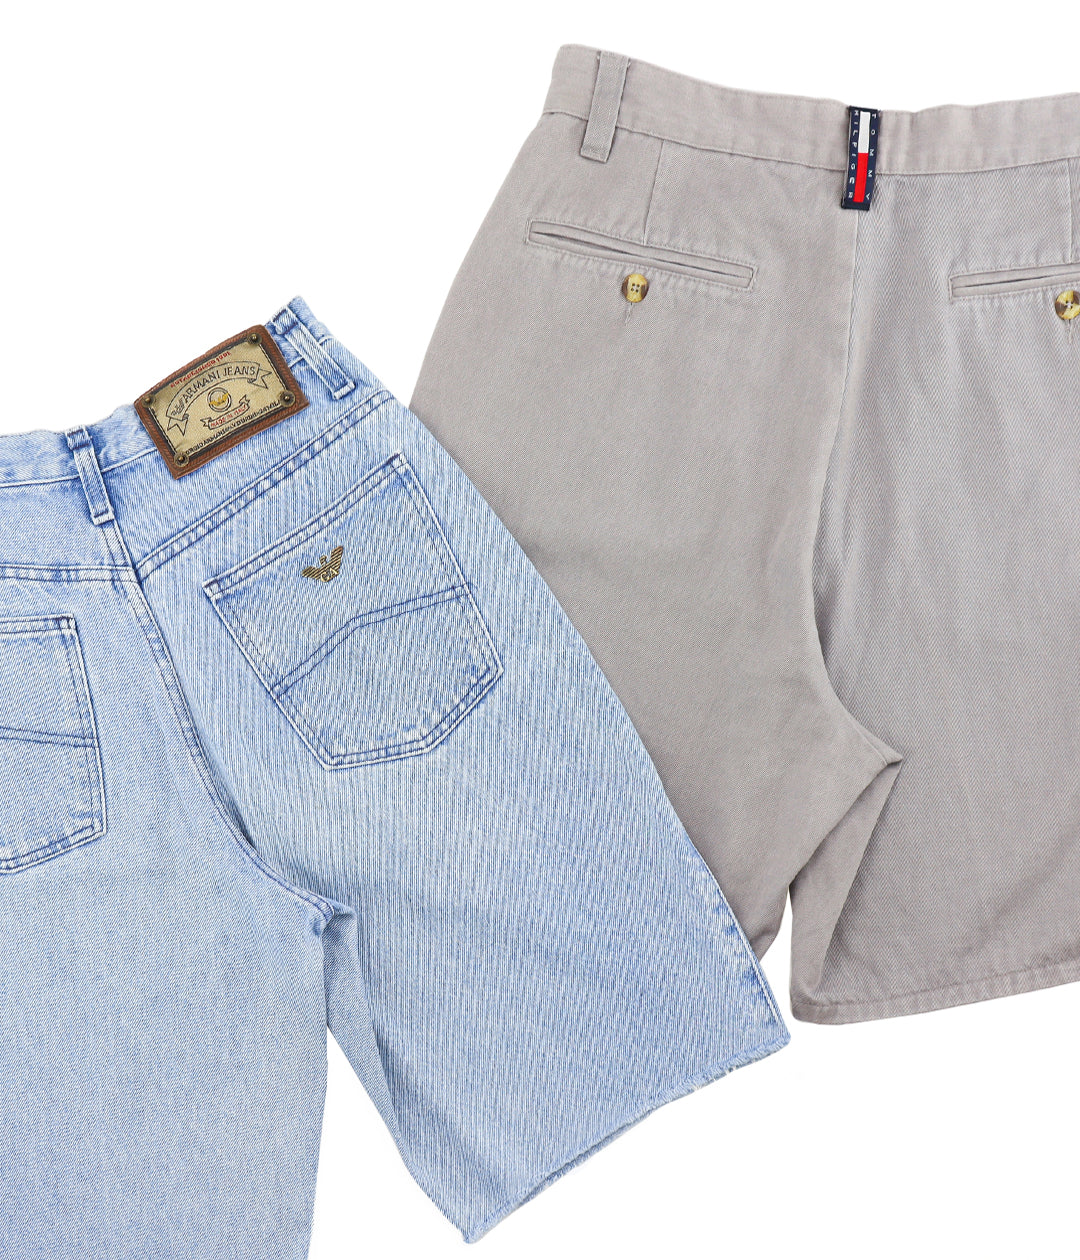 Best Selection of Assorted Branded Jeans Shorts